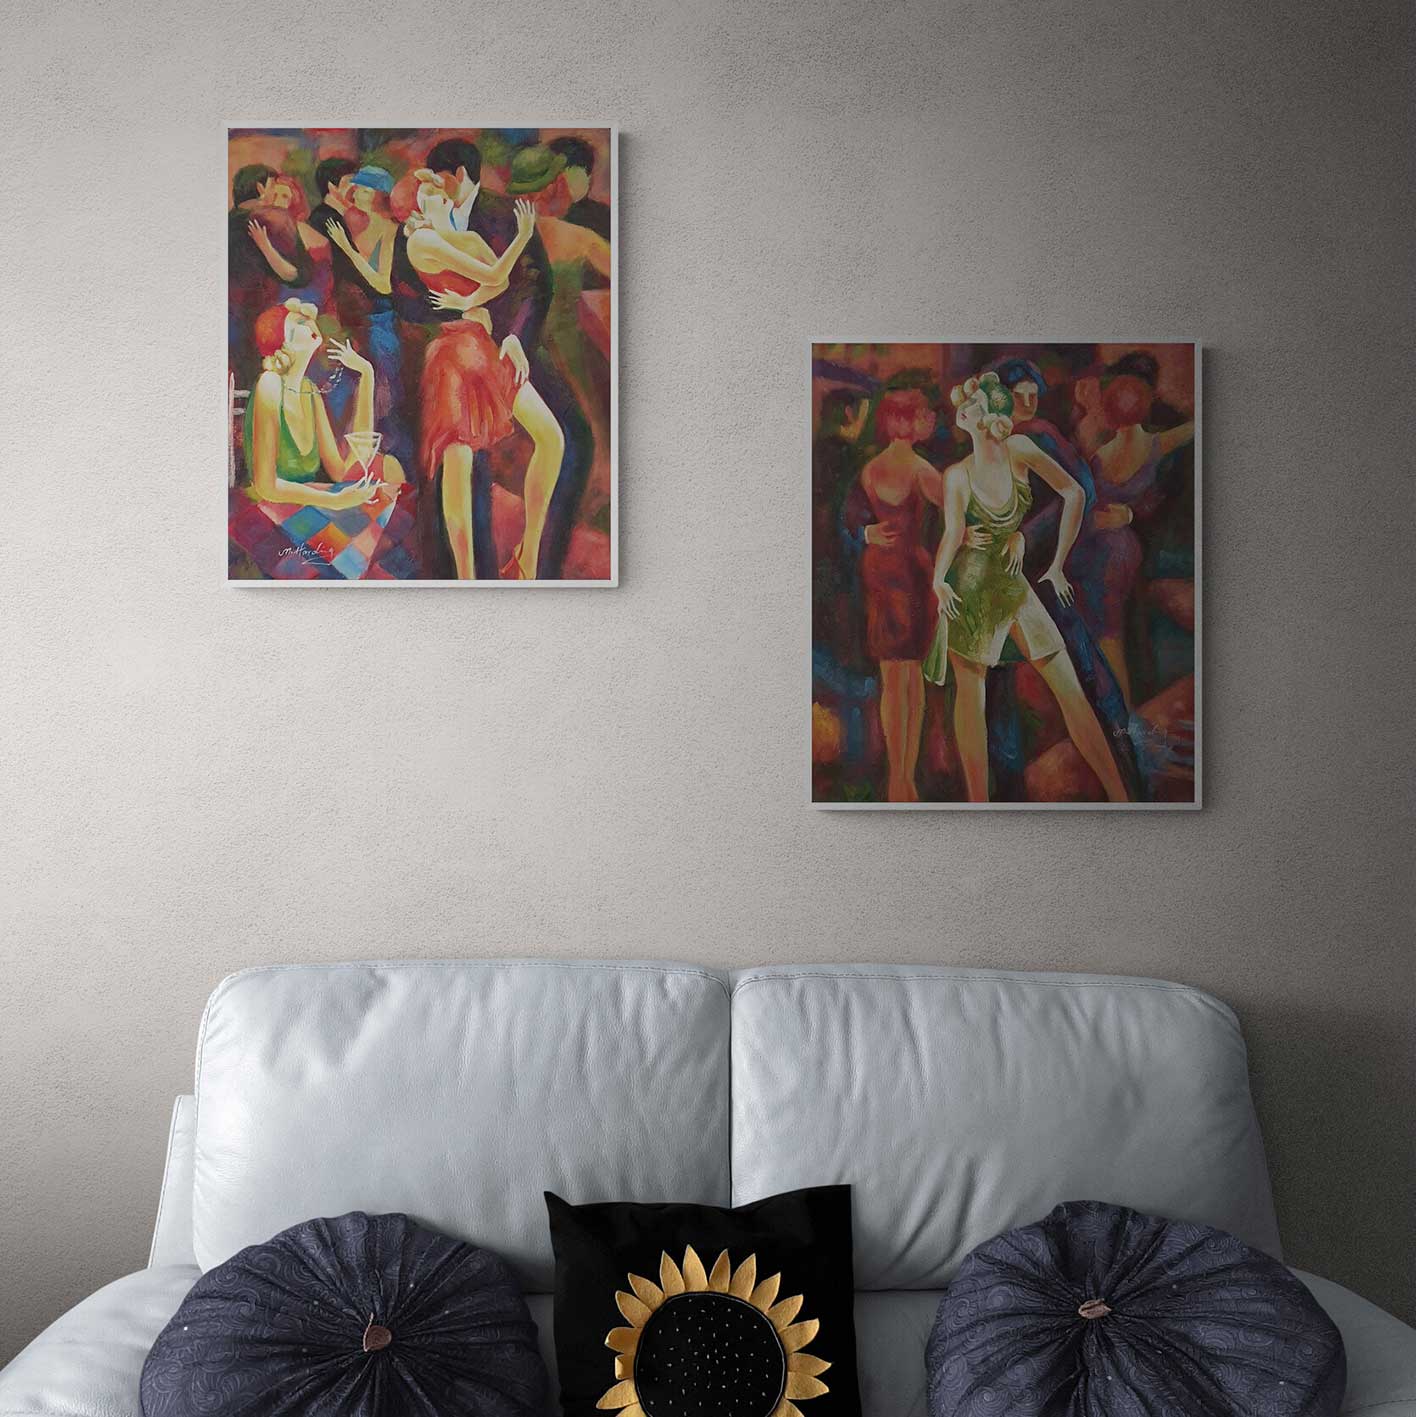 Party Diptych Painting 50x60 cm [2 pieces]